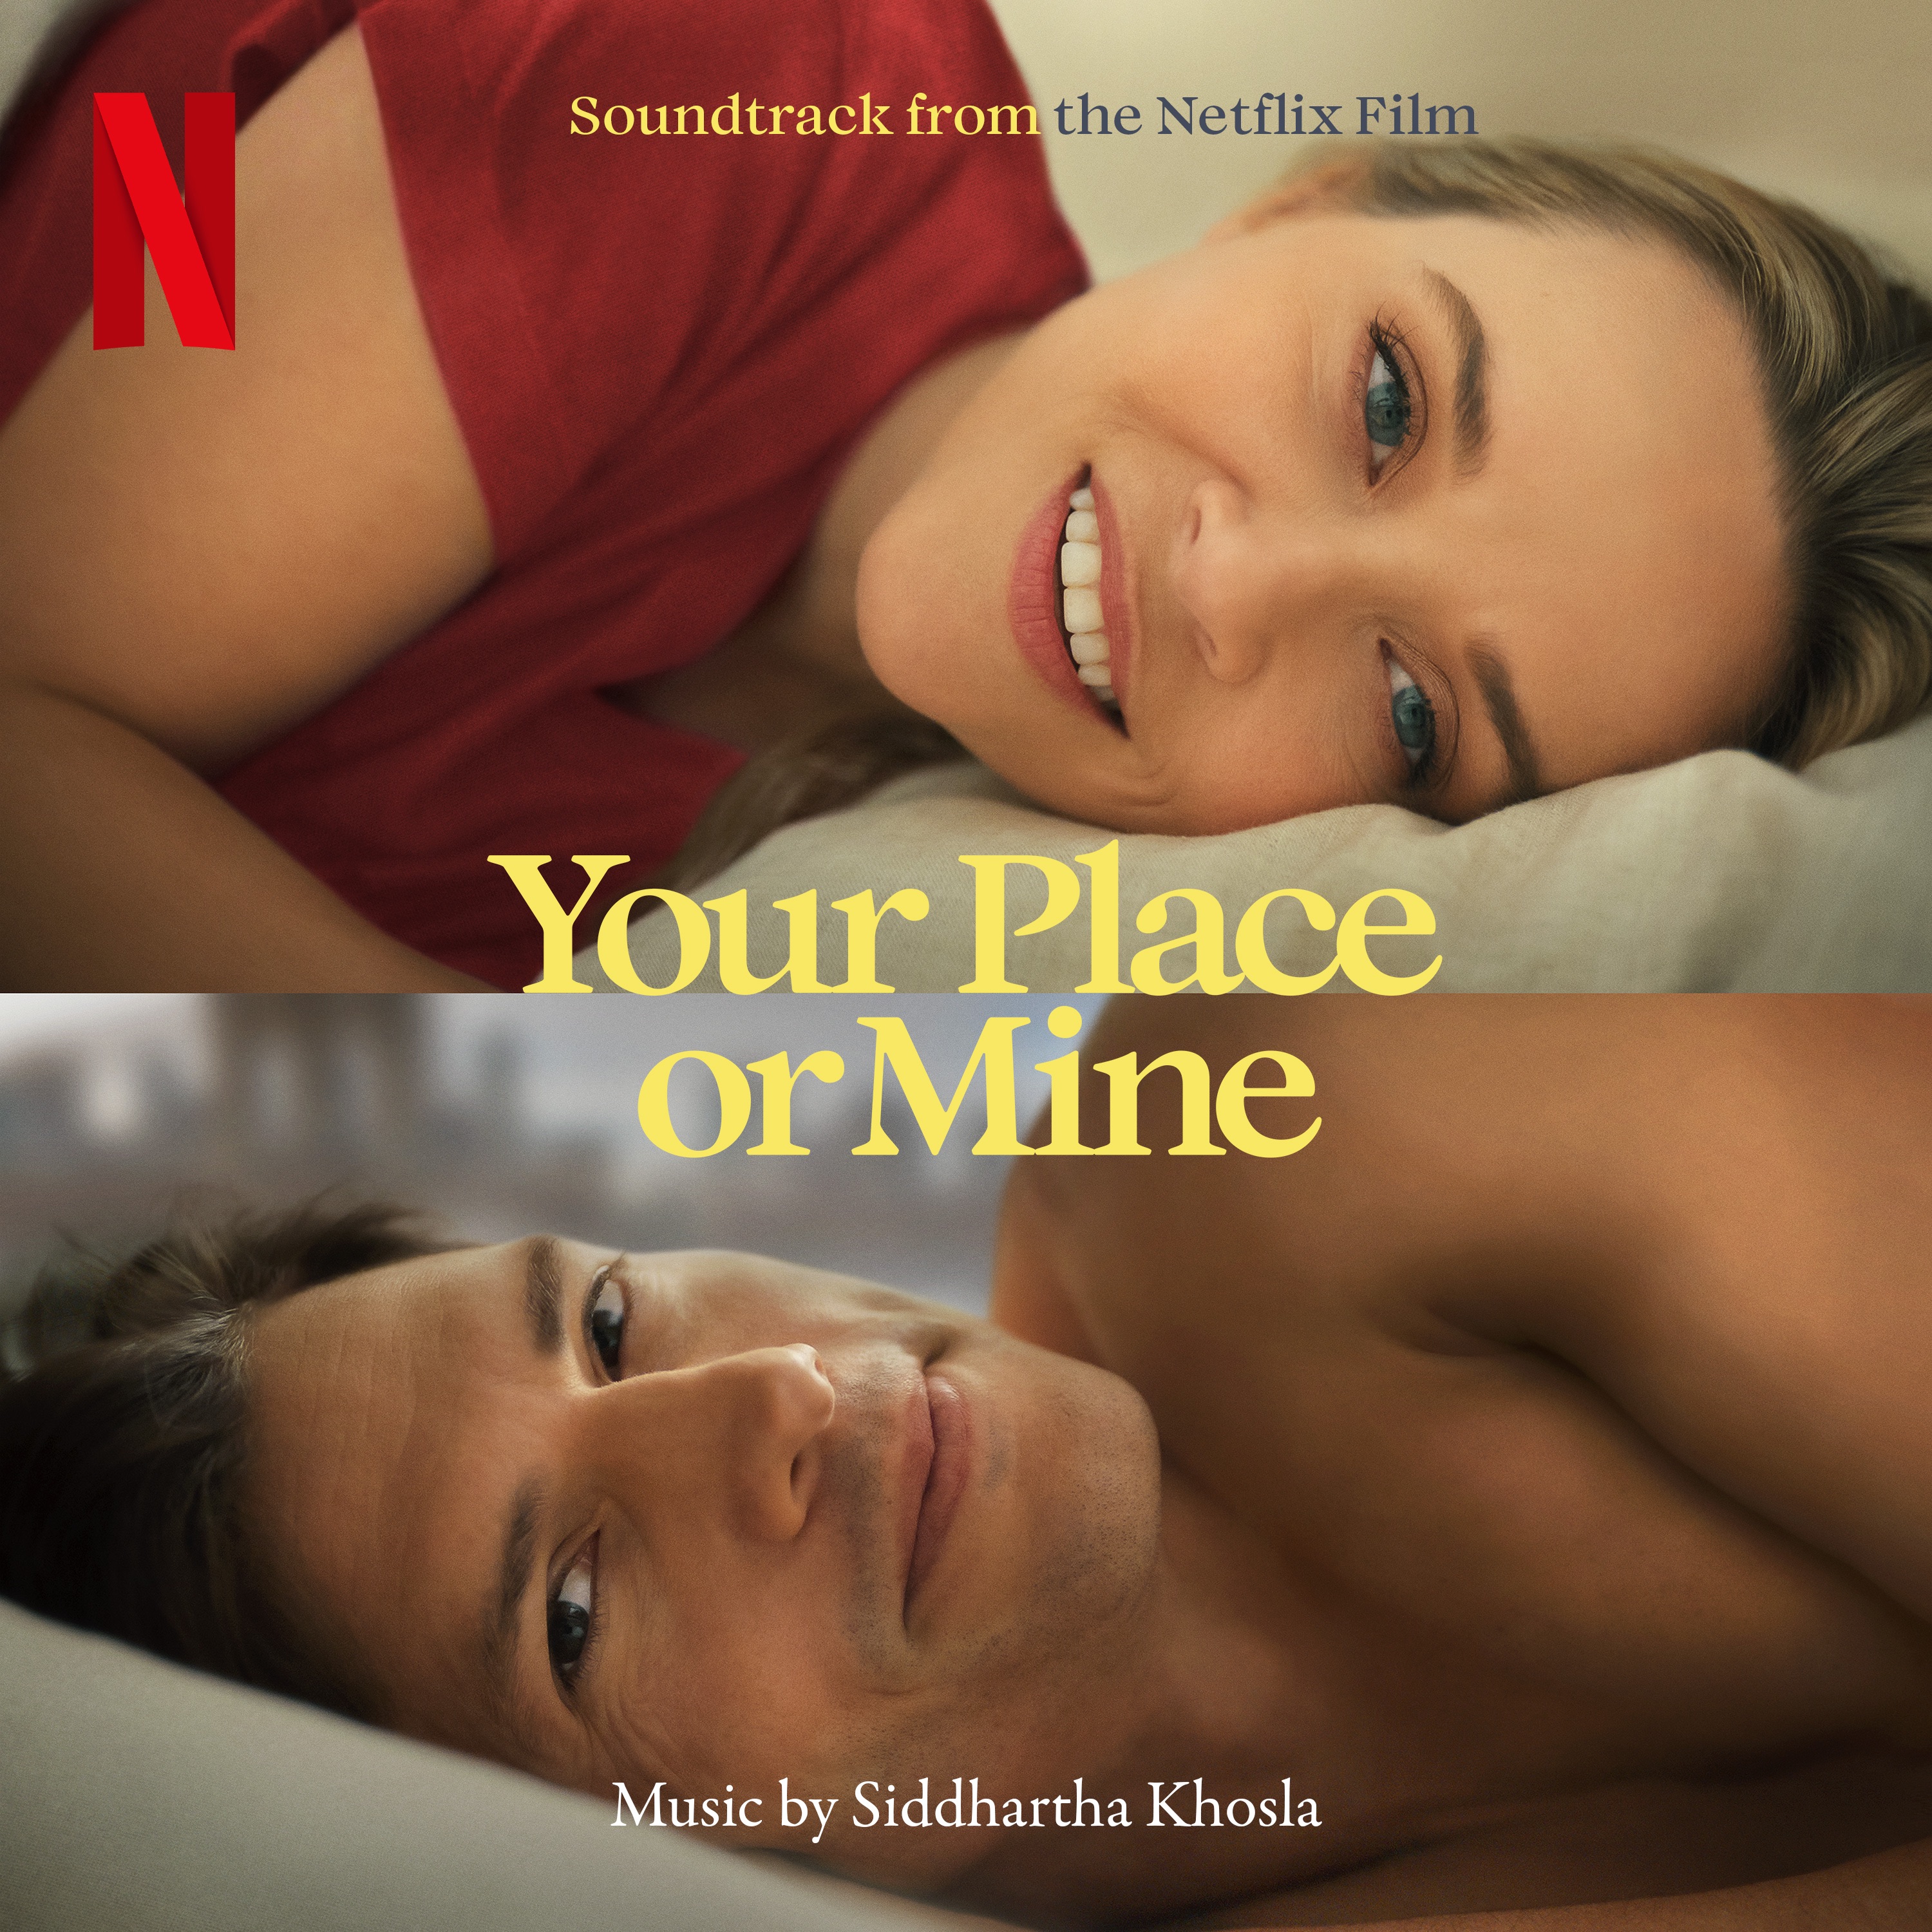 Get Your Heart Racing with Your Place or Mine on Netflix